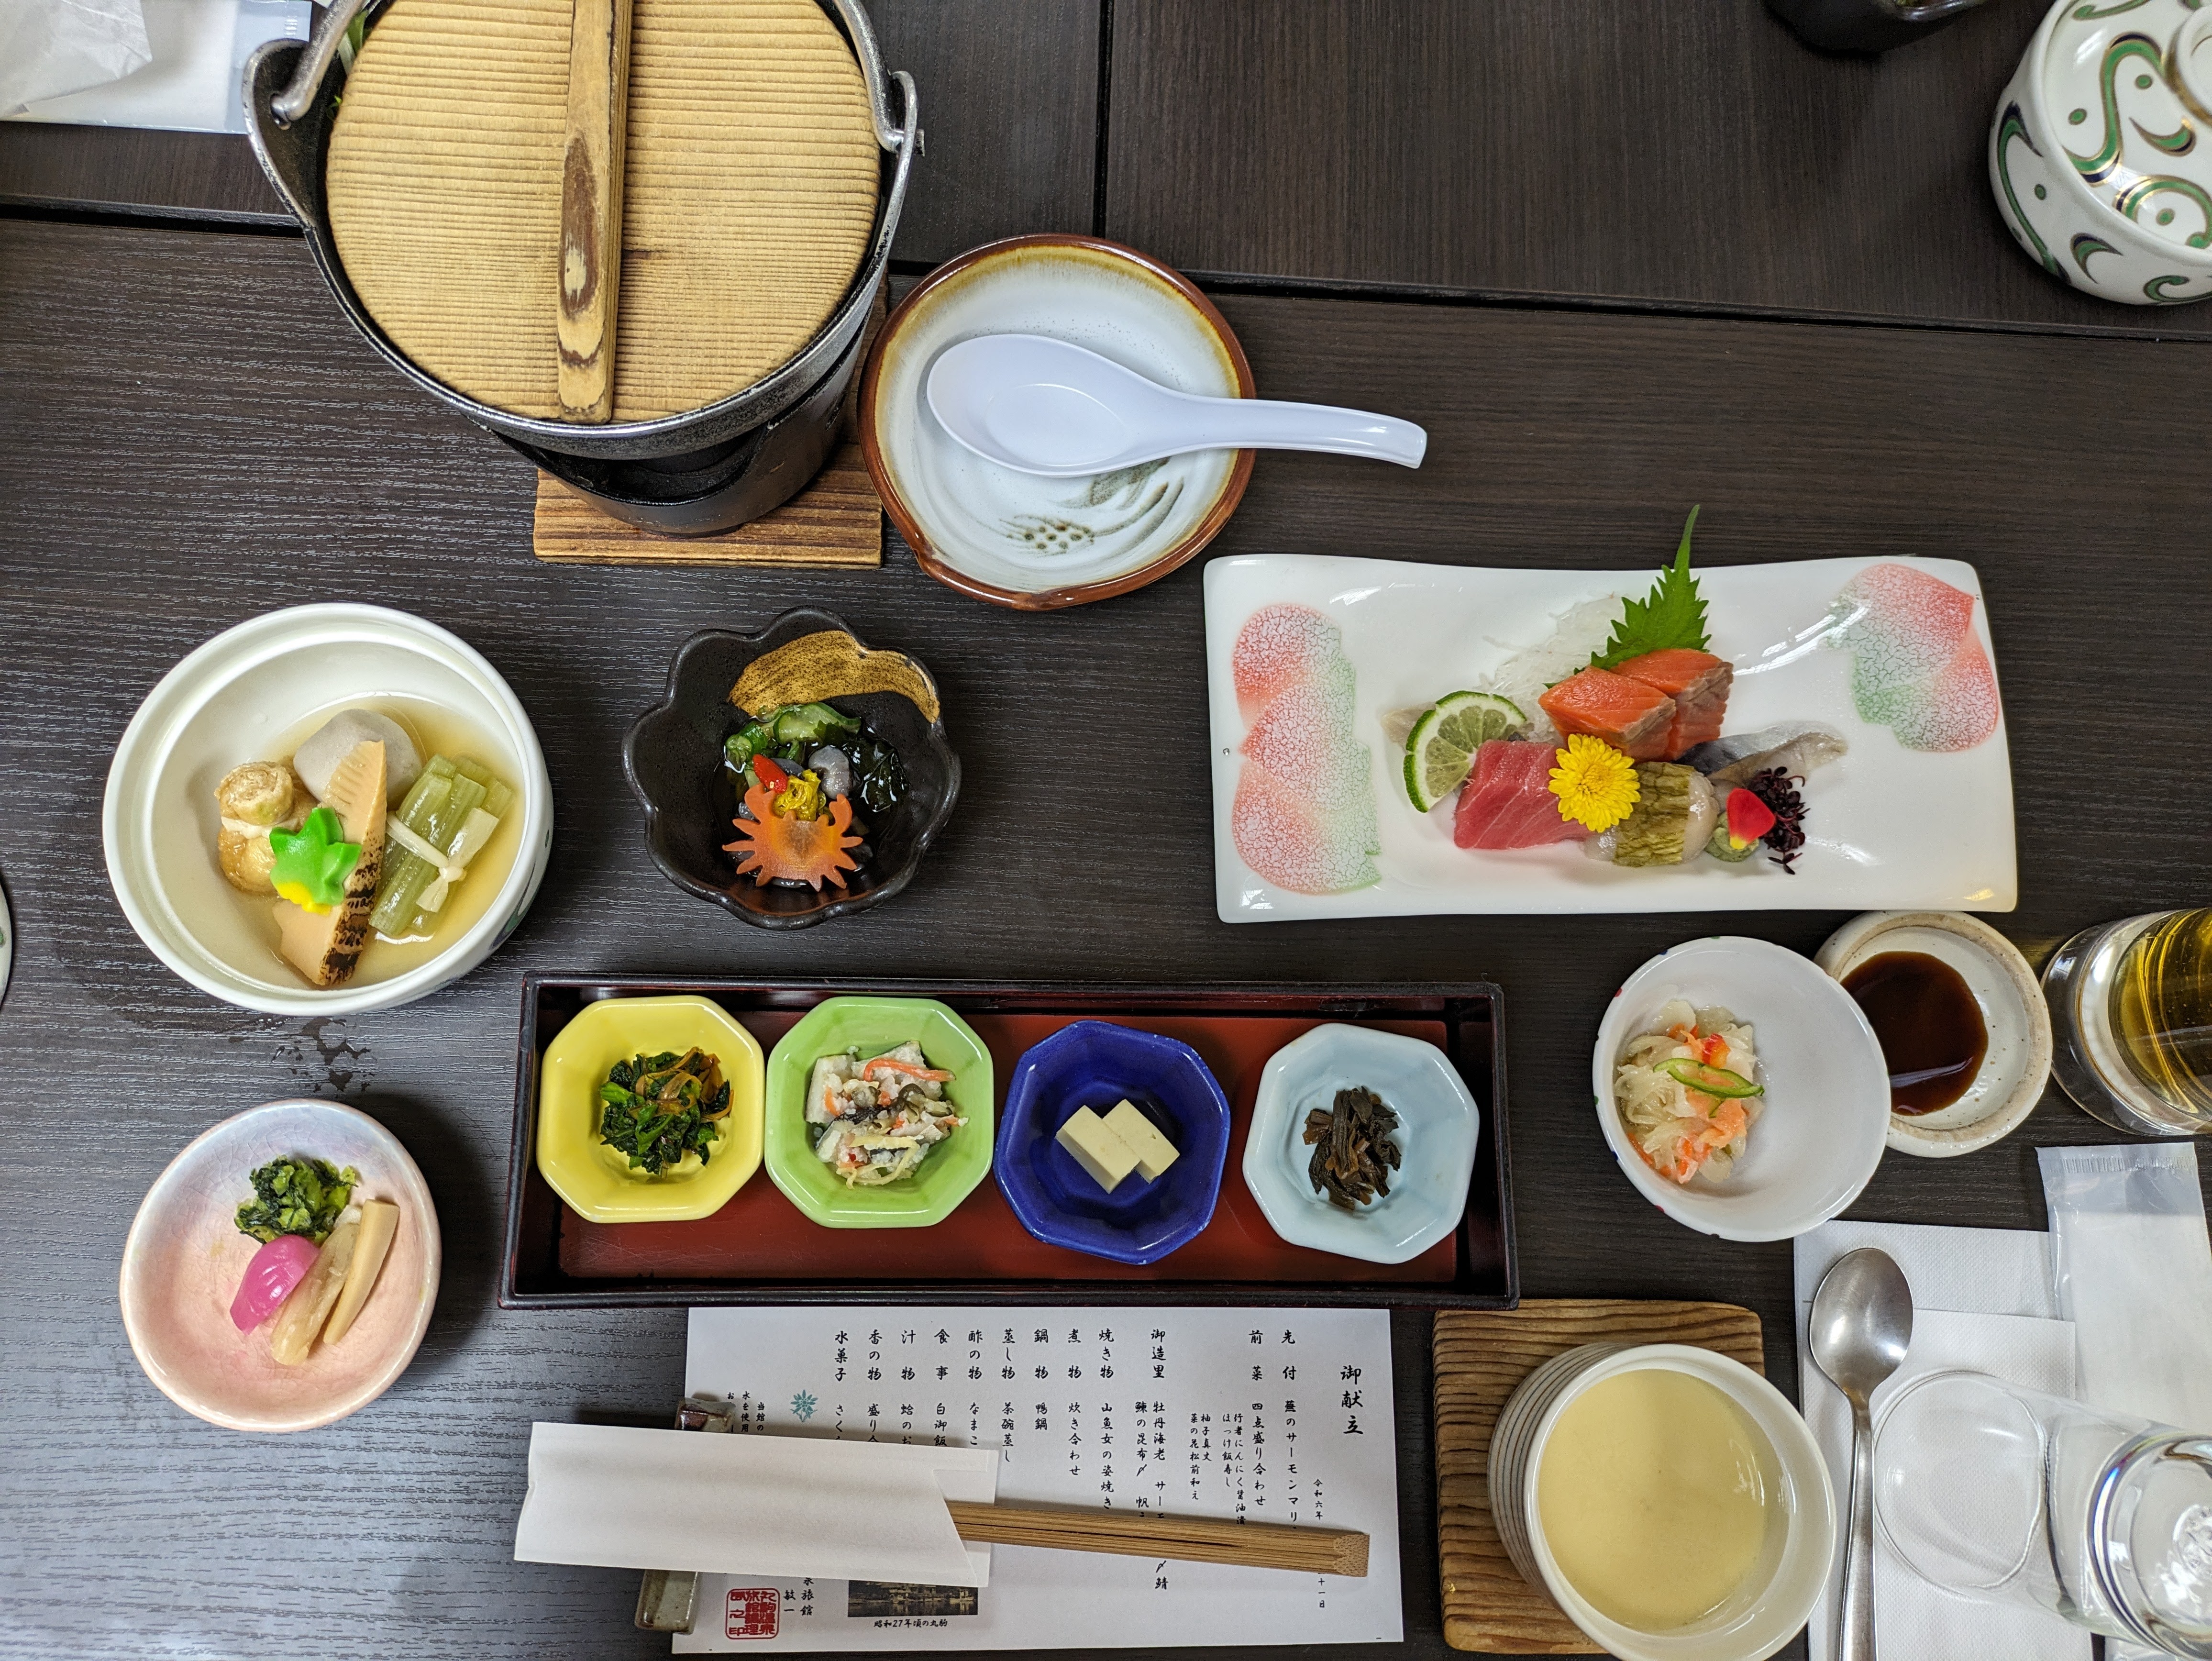 A colorful shot of small dishes with various bites contained therein.